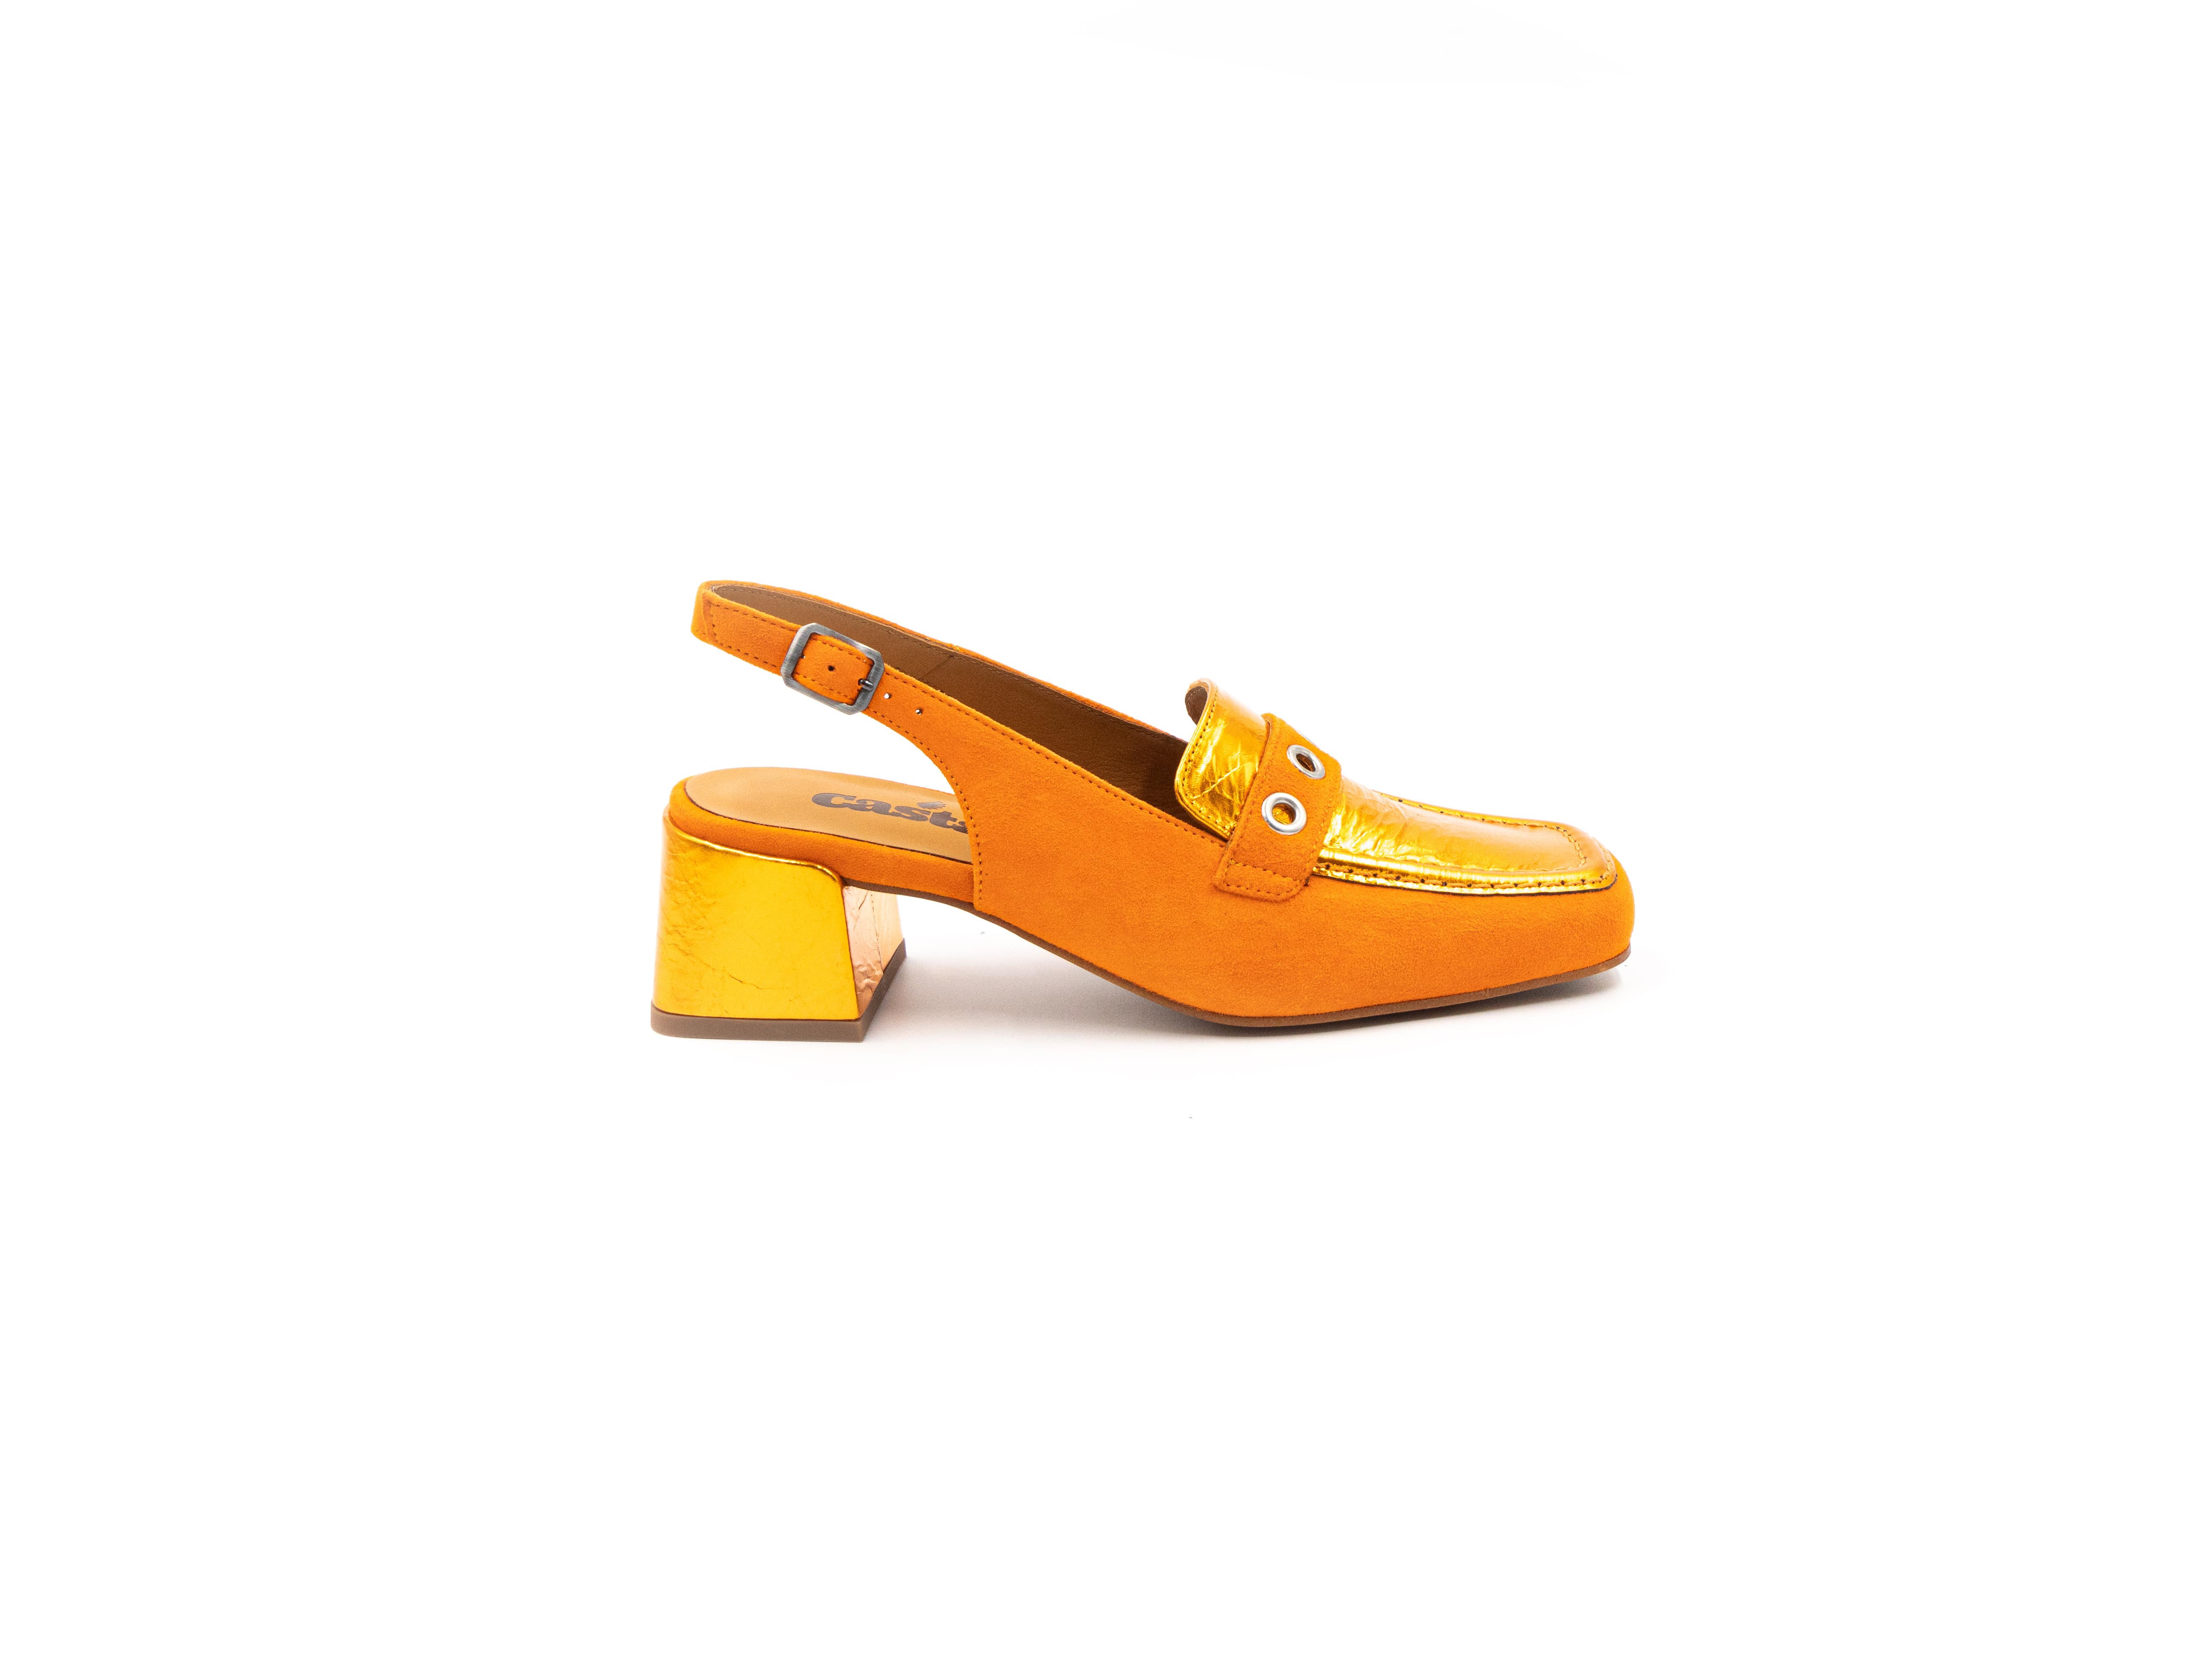 Summer loafers in shades of orange.